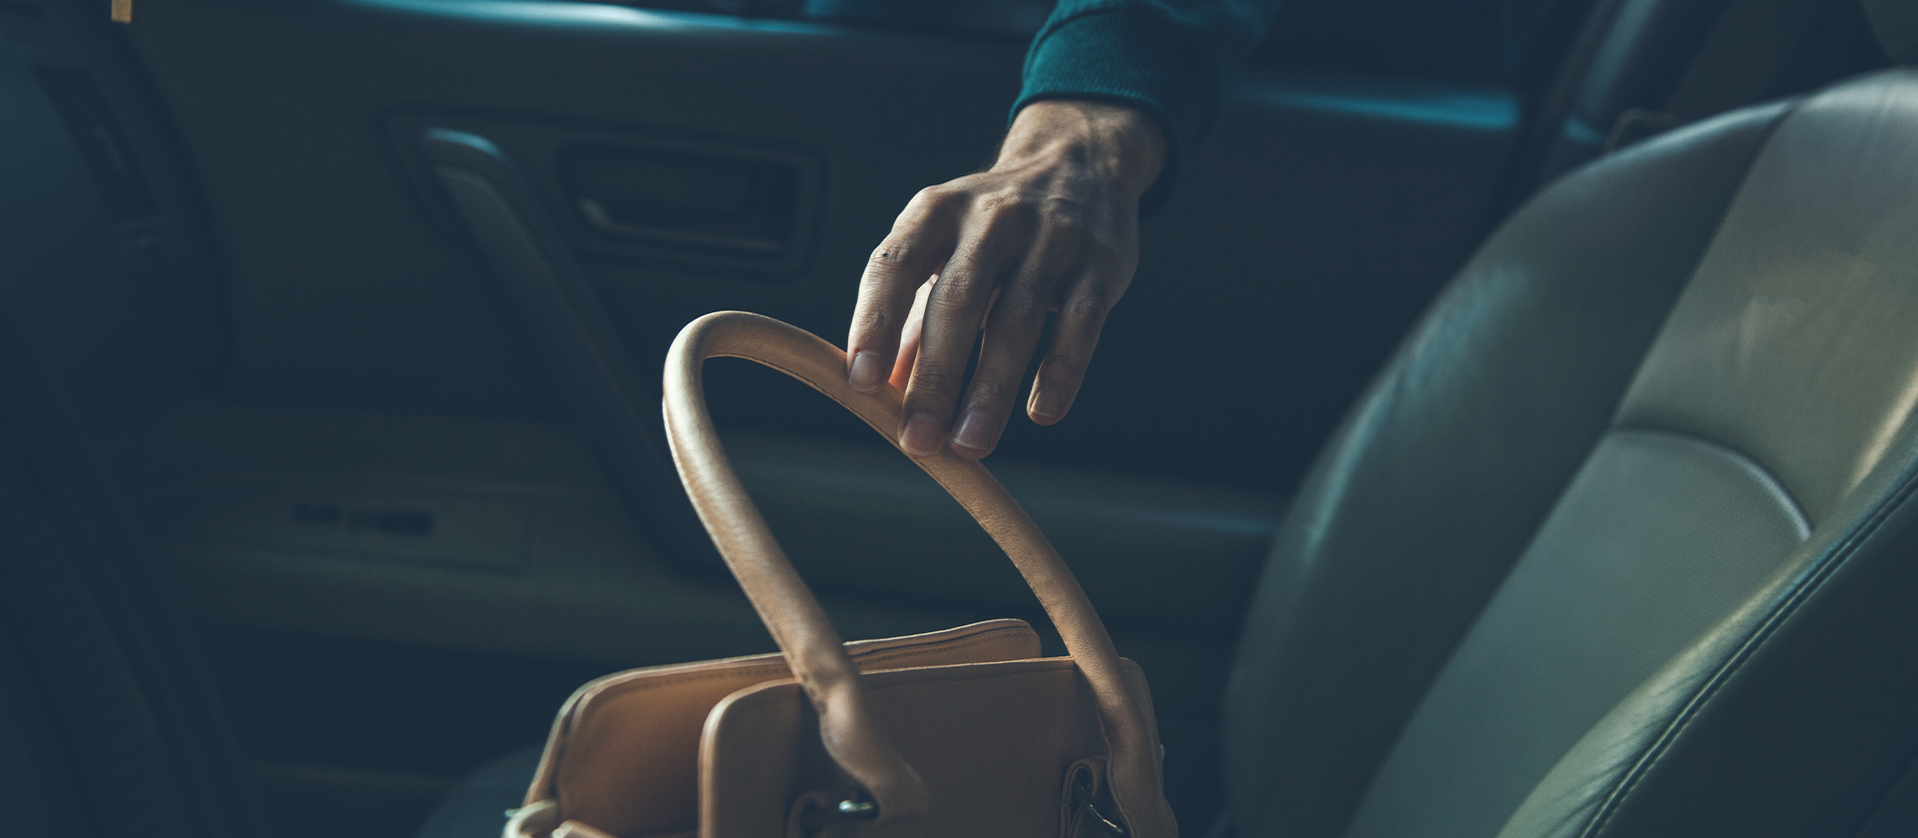 A person reaches into an open car to grab a tan handbag from the passenger seat, with a focus on their hand and the top of the bag.